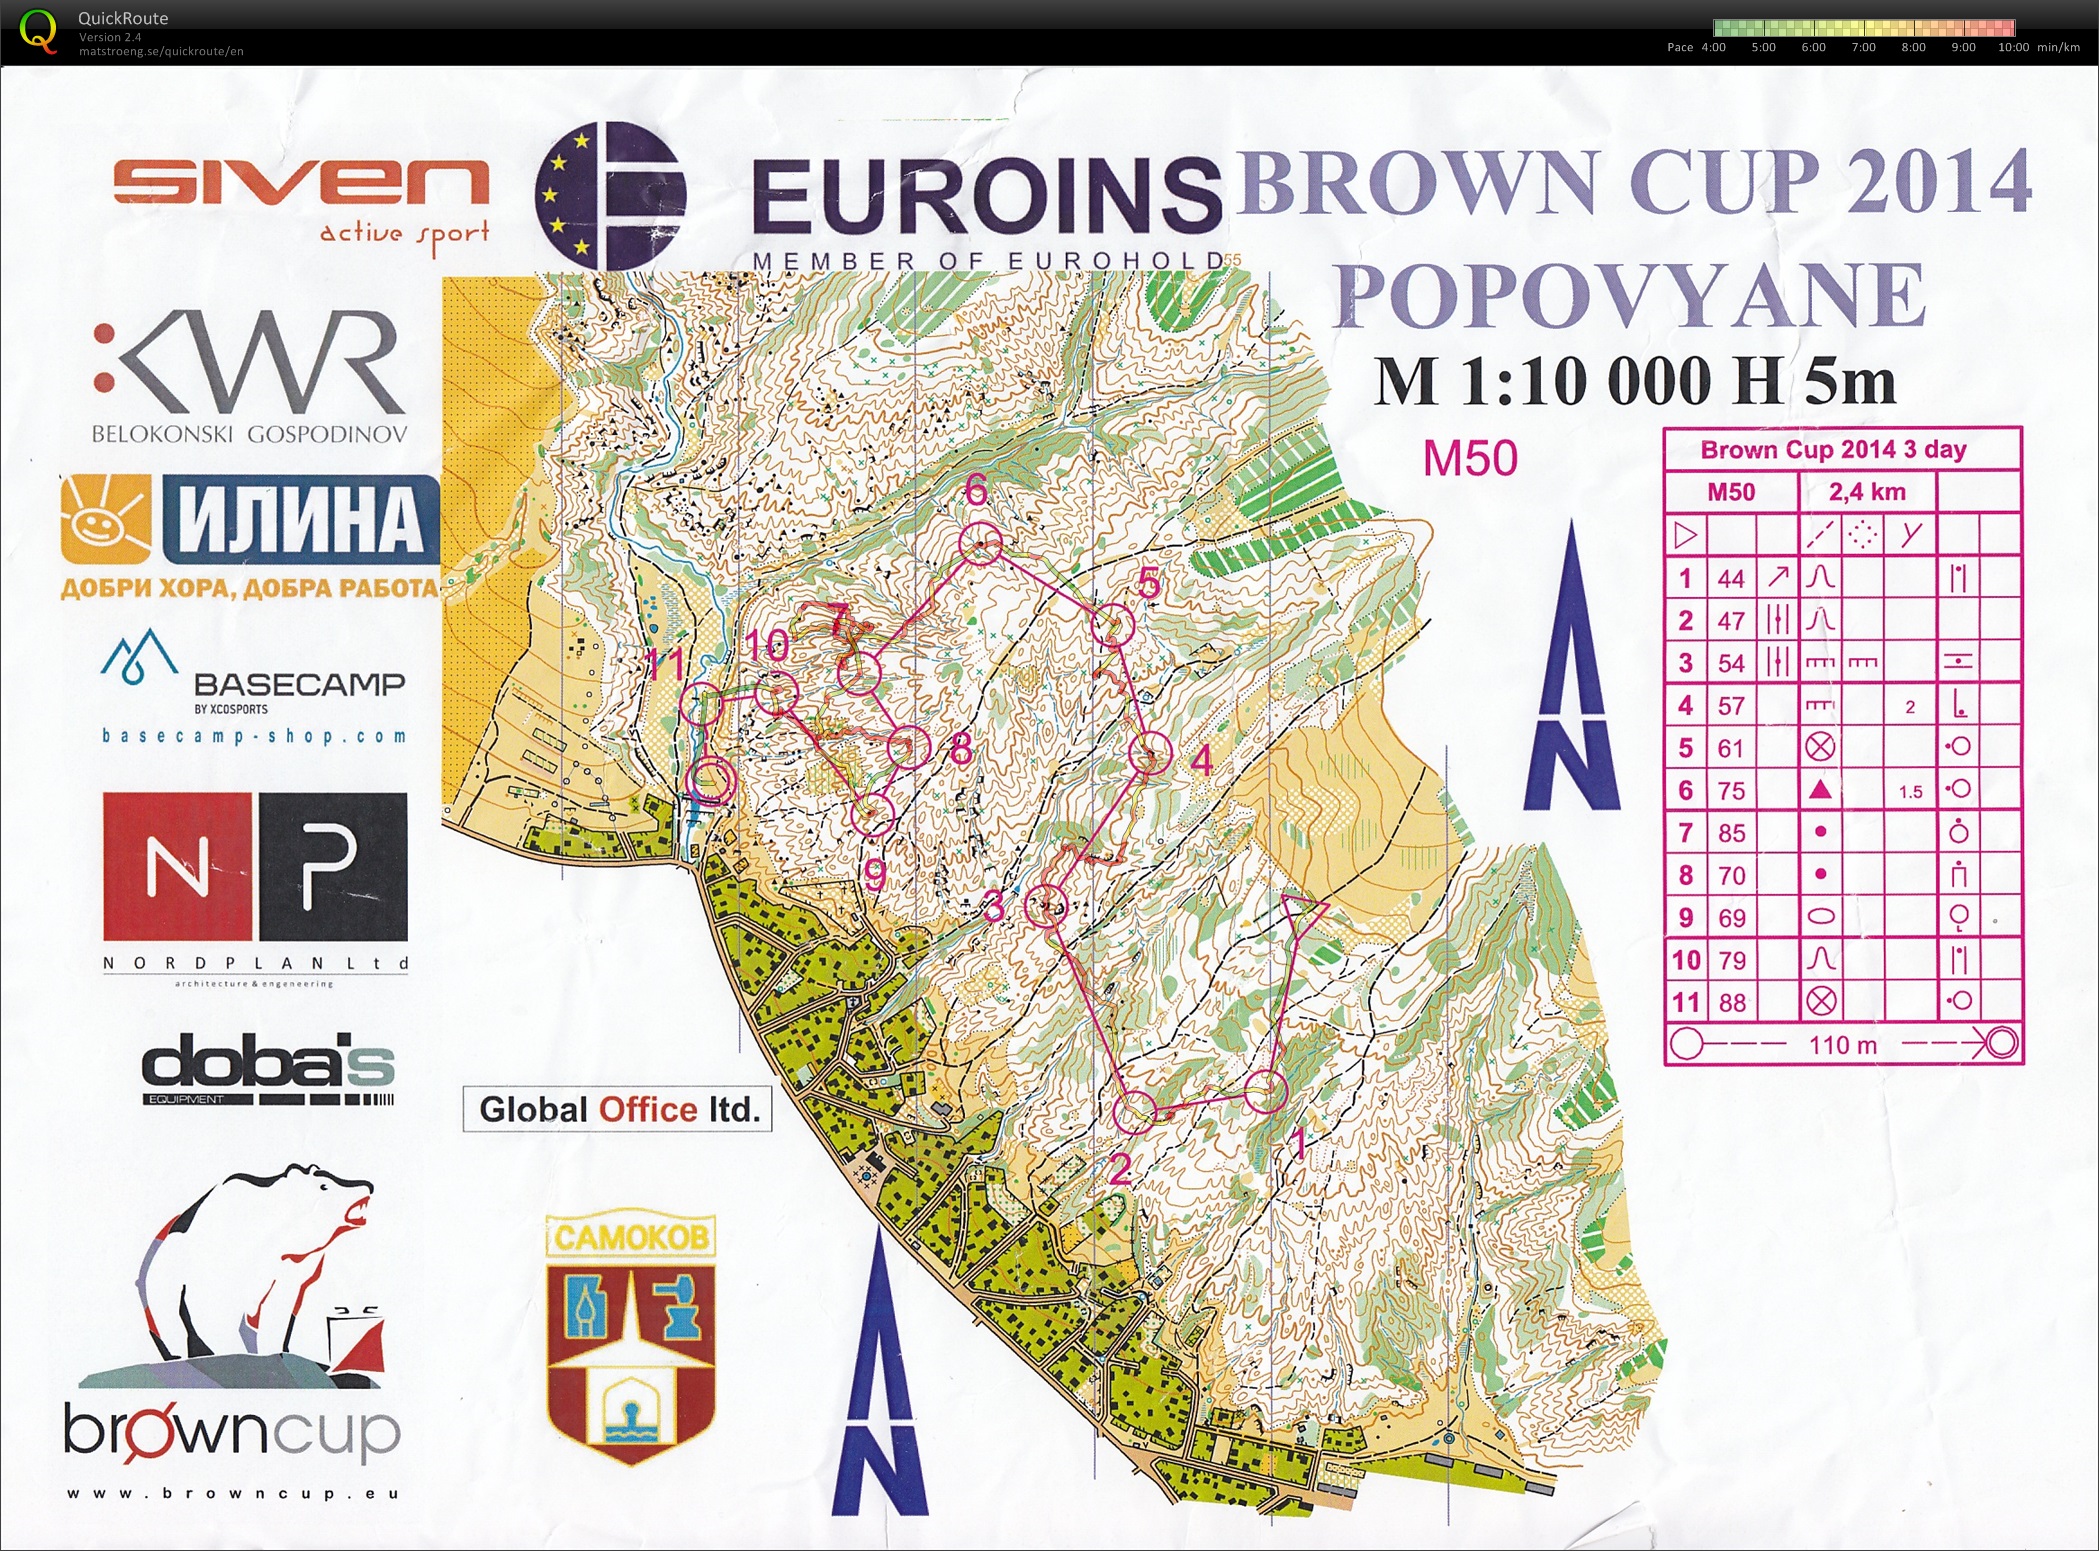 Brown-Cup 2014 E3 (05-05-2014)